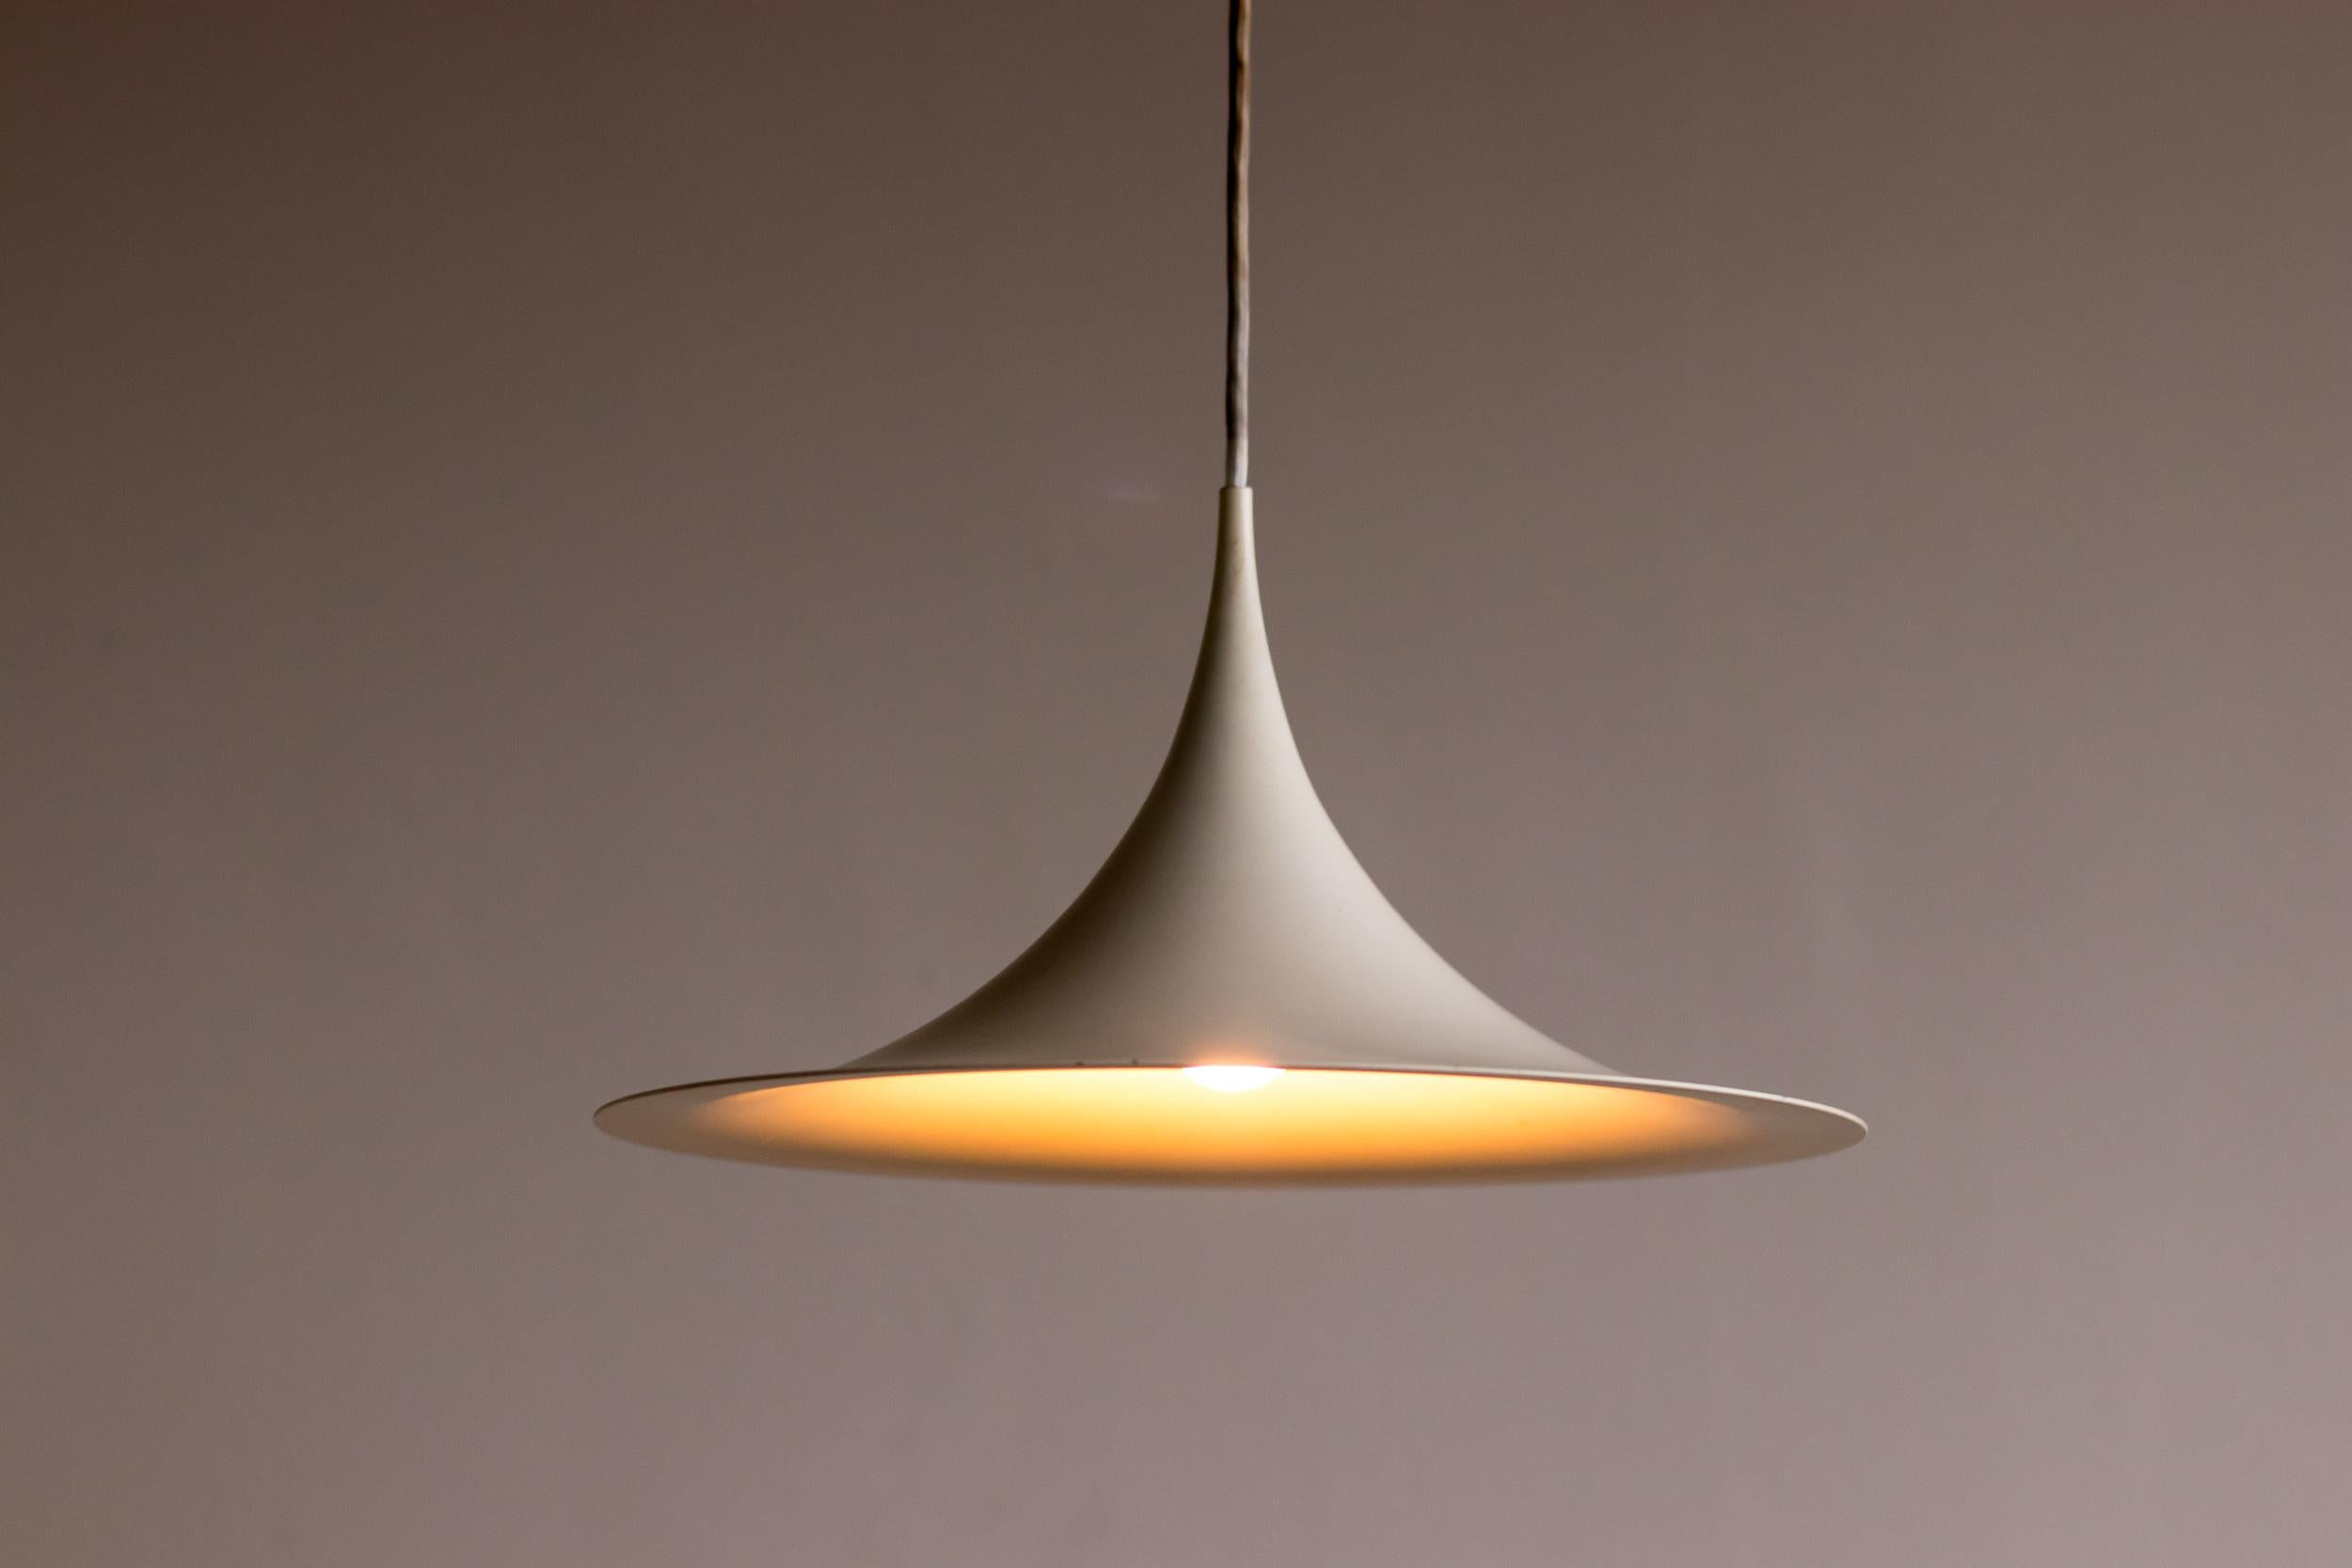 White enameled aluminium pendant lamp designed by Claus Bonderup and Thorsten Thorup for Fog and Mørup. Very early edition with bakelite hardware in exquisite vintage condition.
Marked with label.

Fog & Mørup was a Danish lighting design company